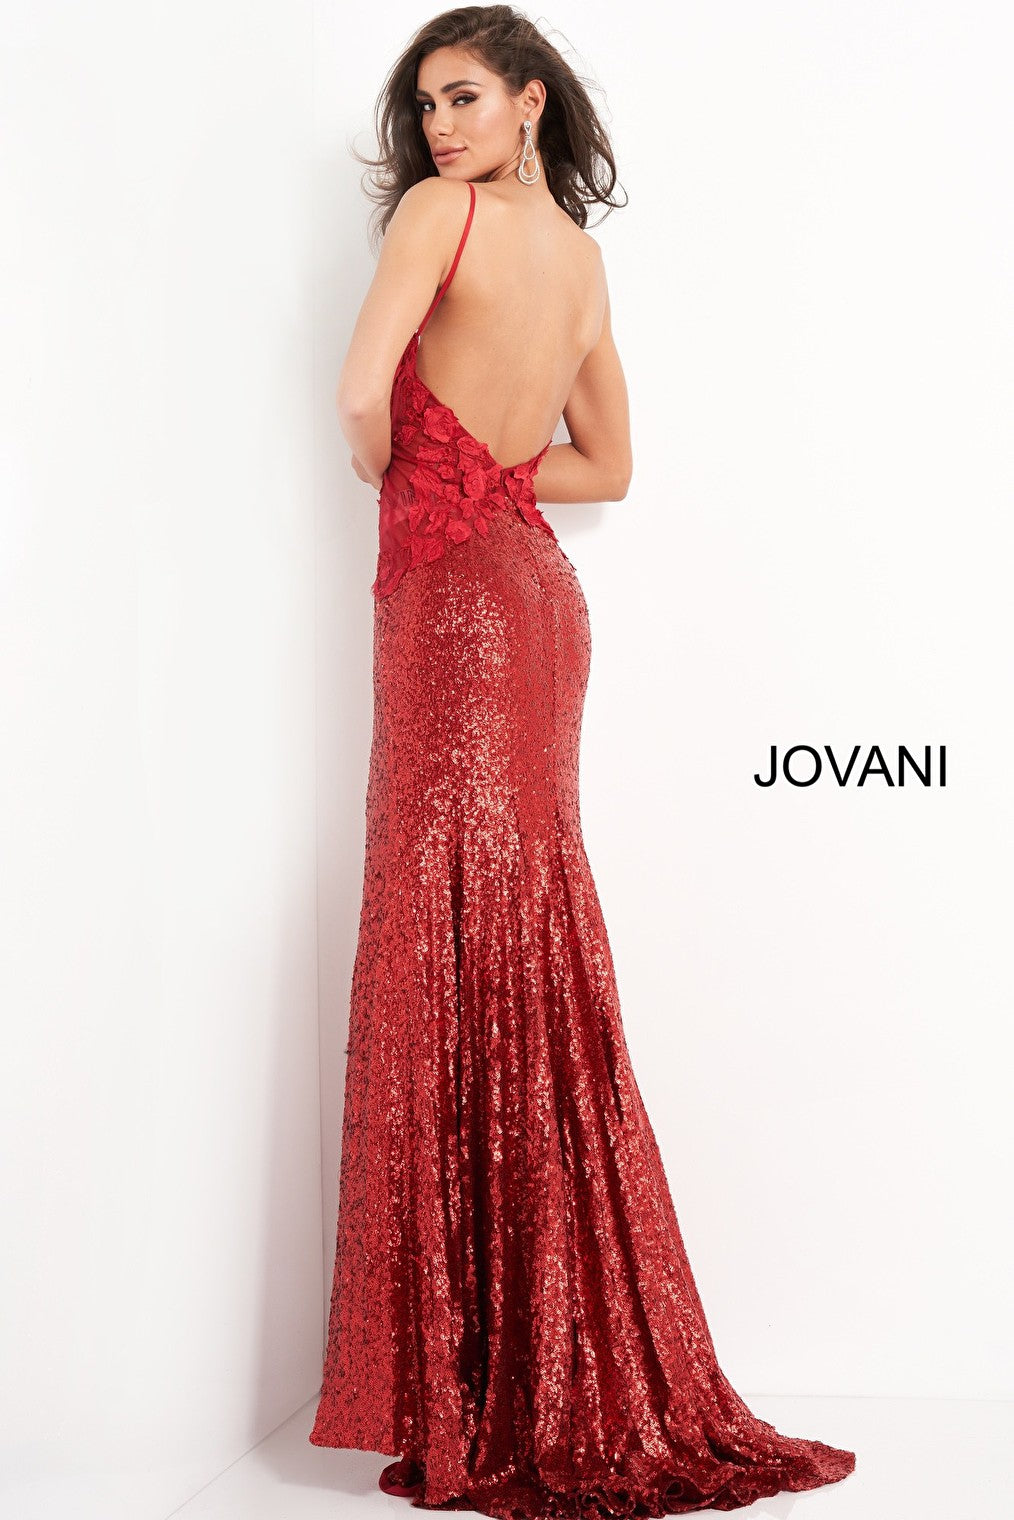 Low back red sequin prom dress 06426